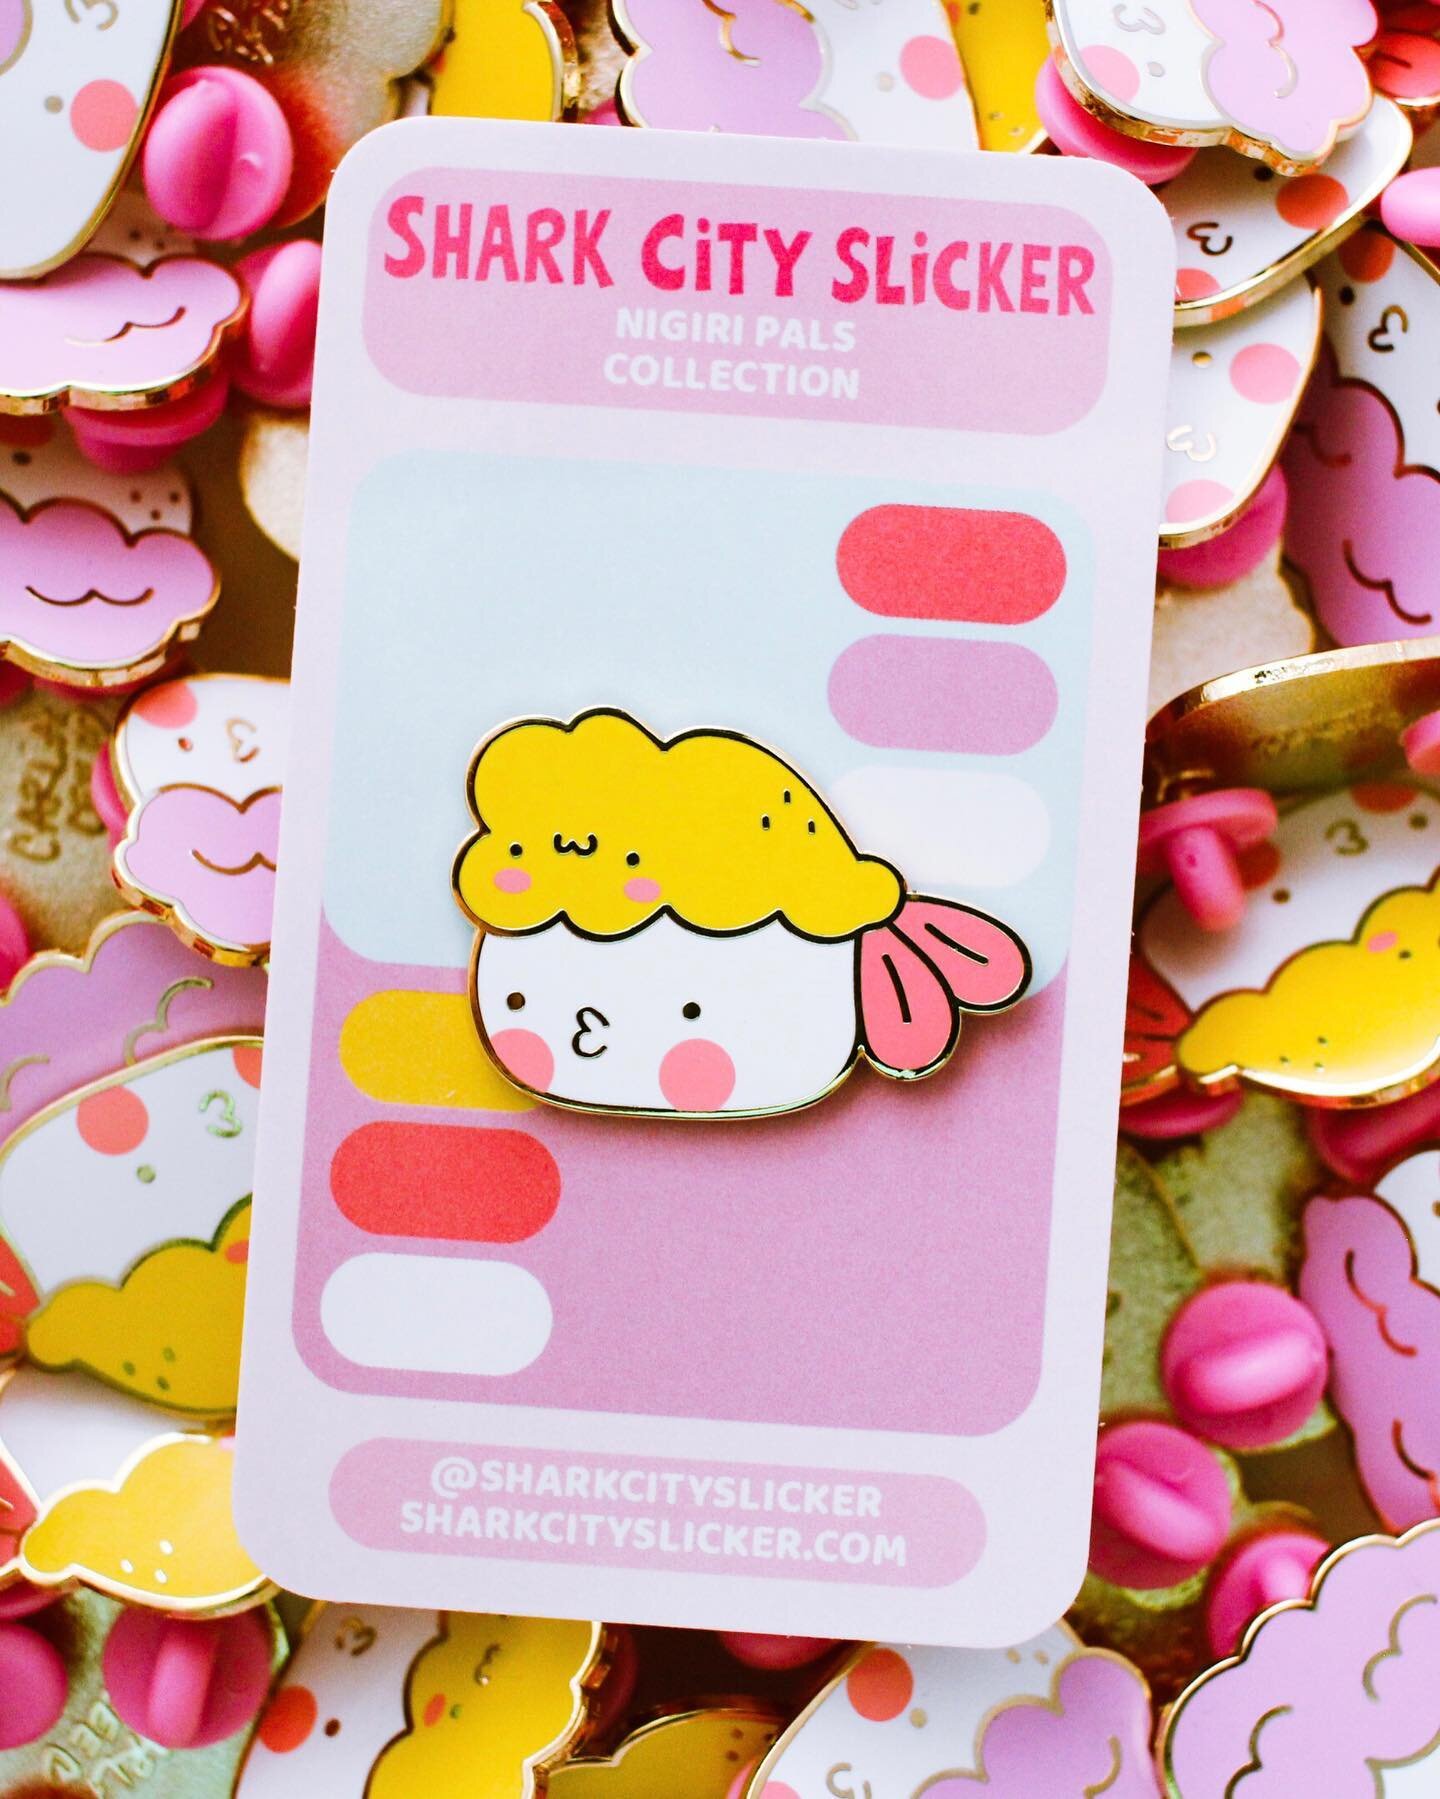 This little pal is ready to go!
.
When I was working on the mock-up pin art, I started moving some swatches around which resulted in this here arrangement. I loved it and decided to make it part of the packaging. If you need it to be a &ldquo;thing&r